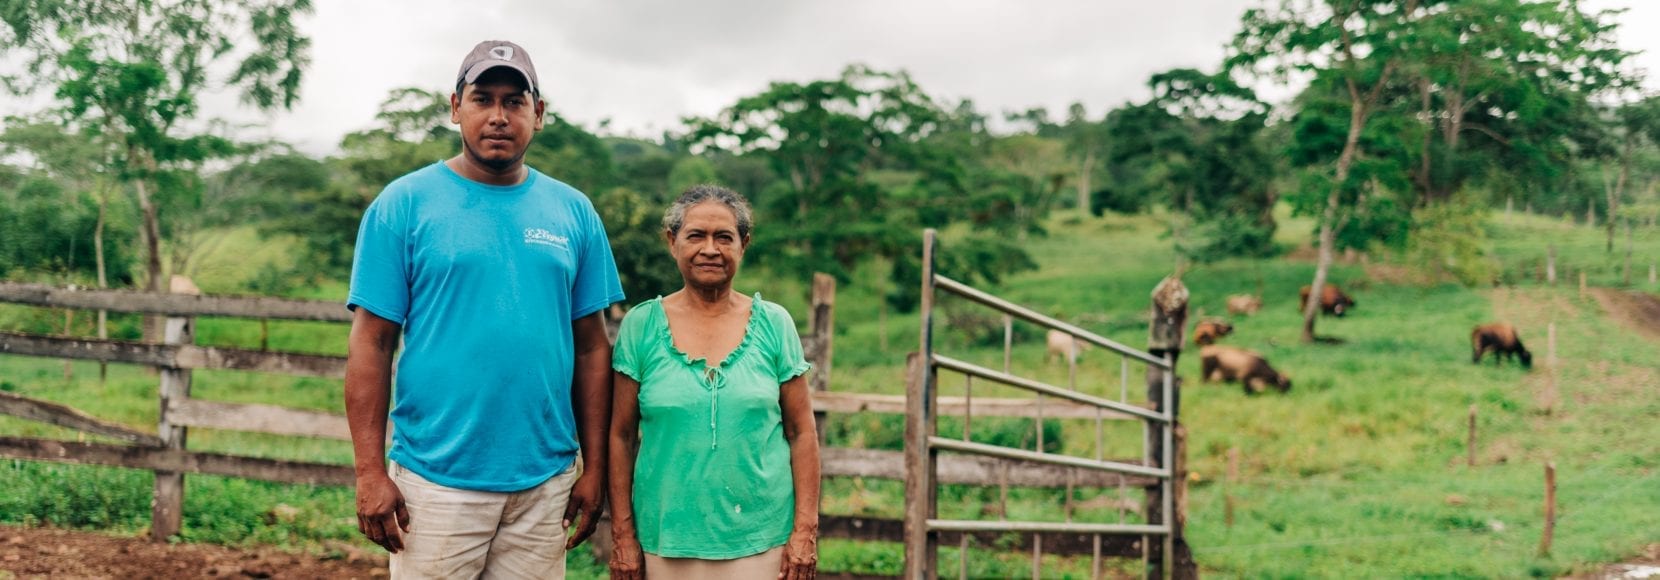 Two people in Nicaragua working on their farm